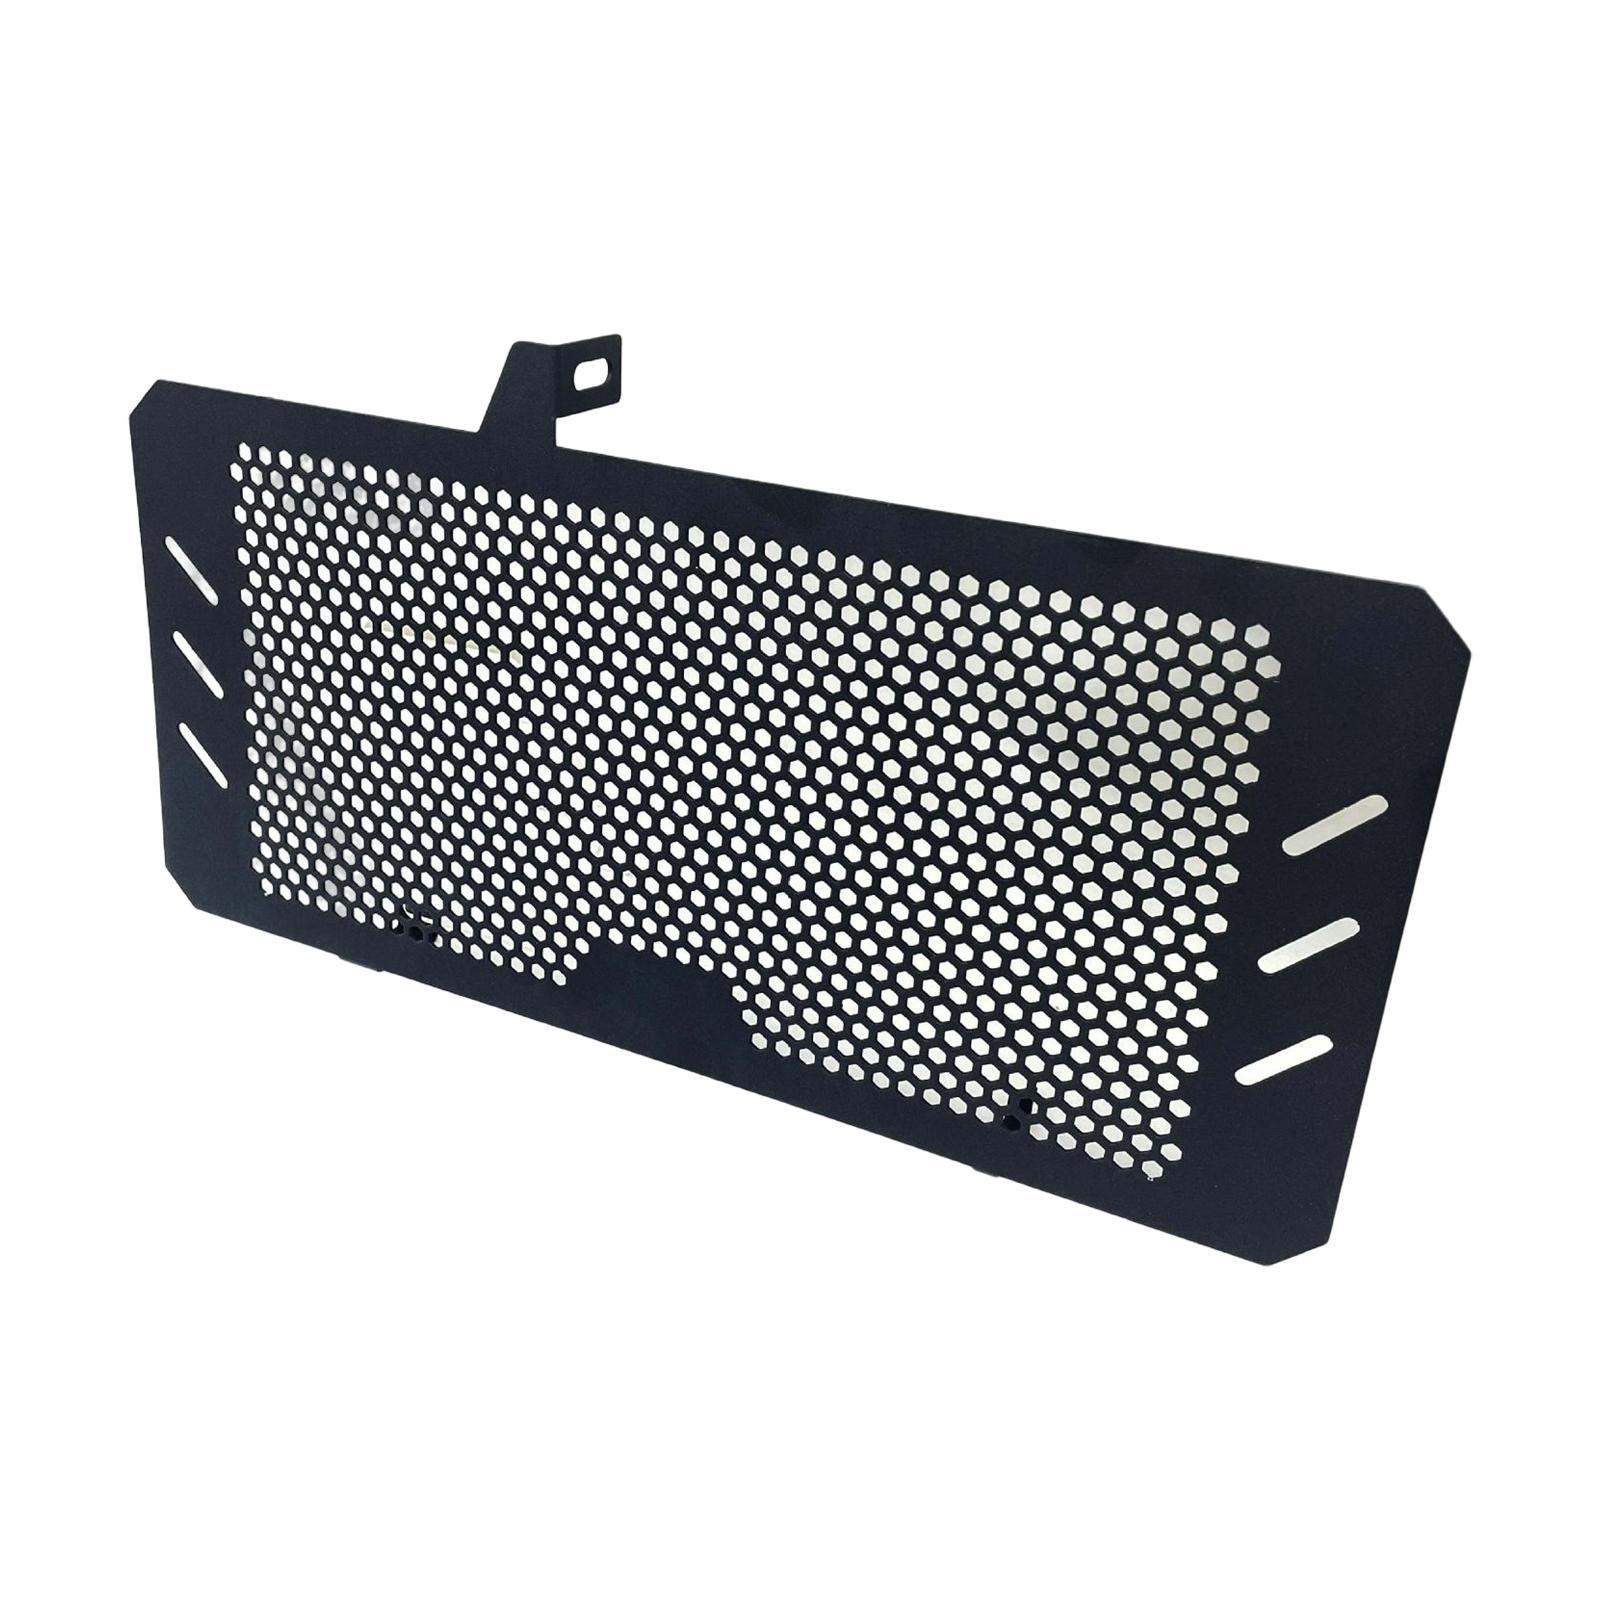 Motorcycle Radiator Grille Guard Cover for Honda NC750 S / x Replace